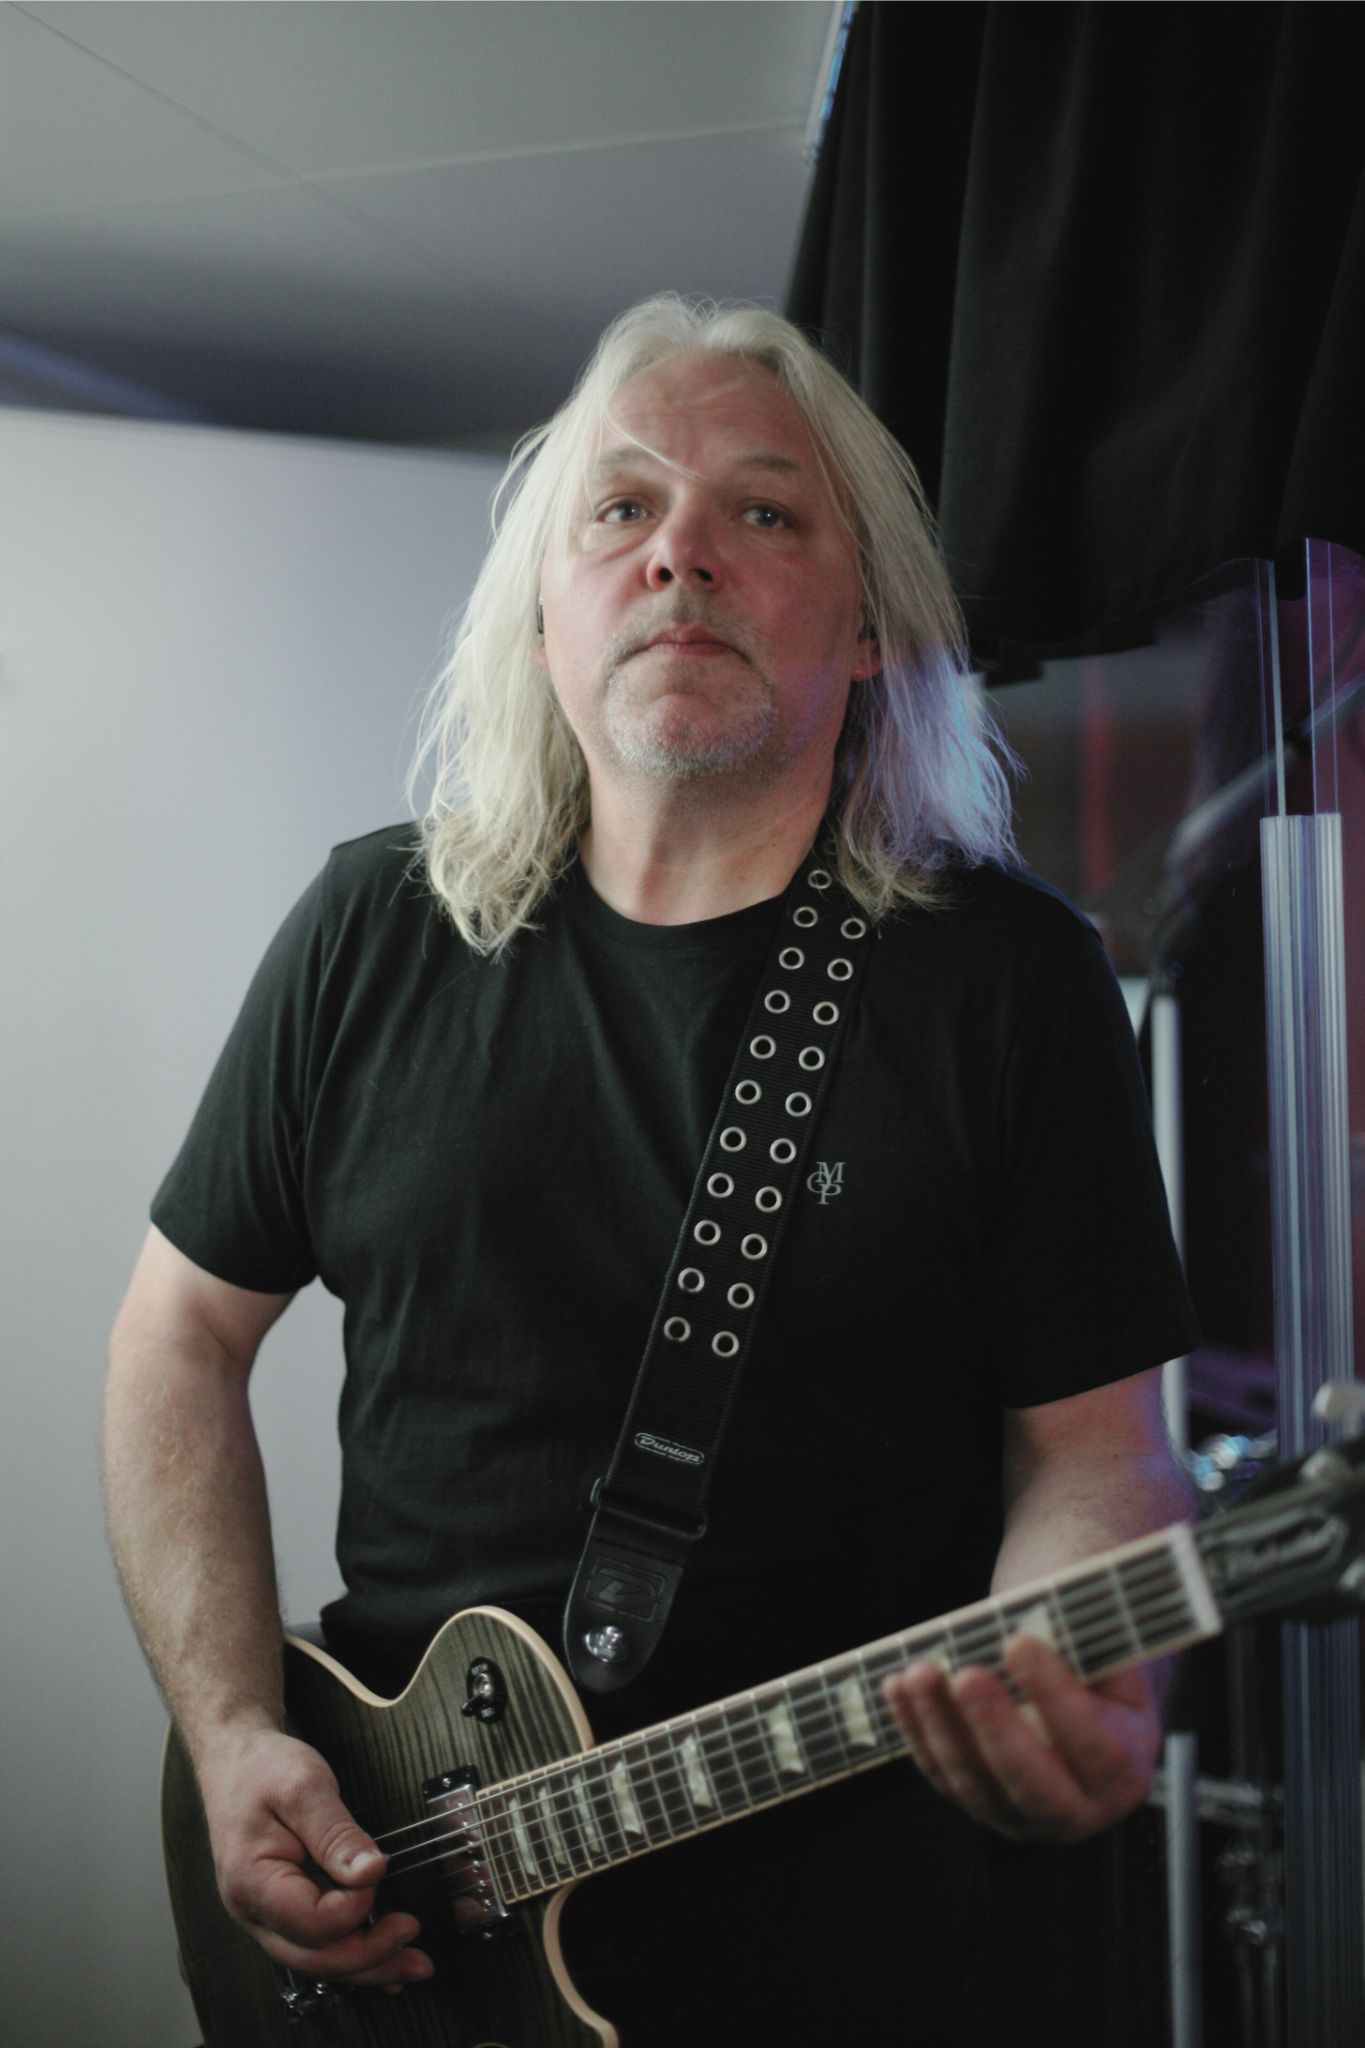 Jonas Tornemalm songwriter, producer and guitar player in the Swedish melodic hard rock band SUM OF ALL.